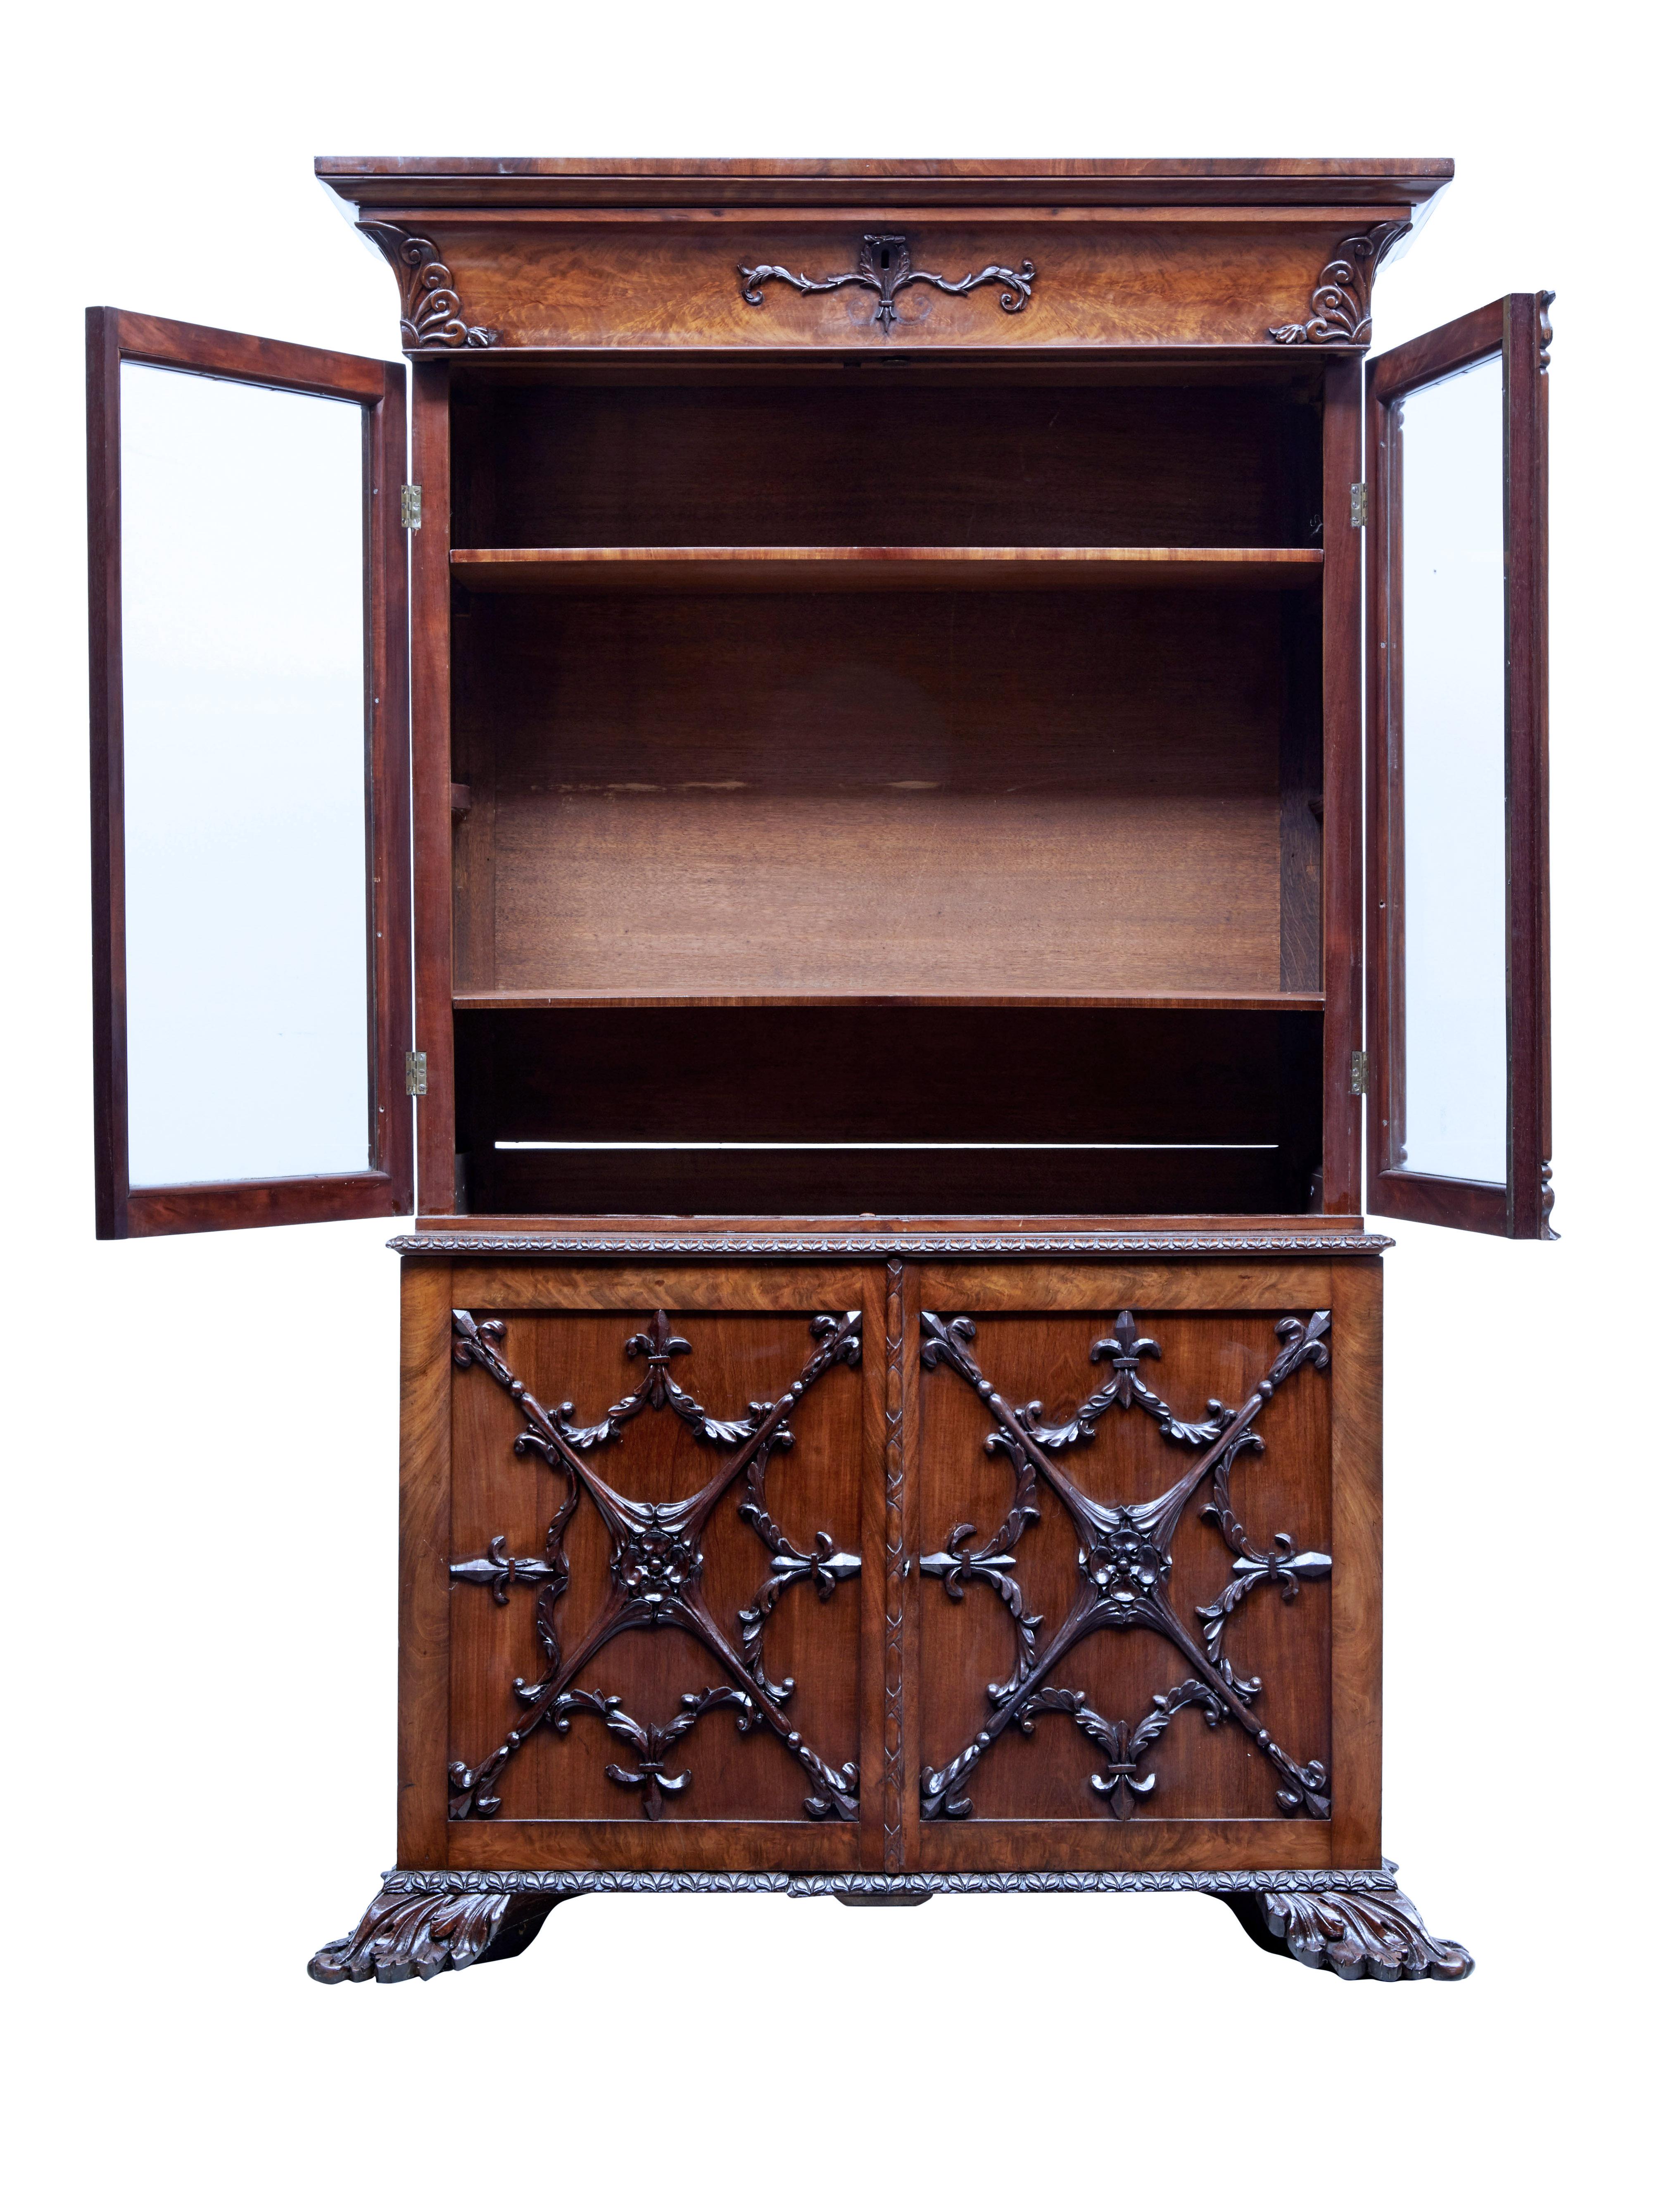 Hand-Carved Mid-19th Century Carved Mahogany Danish Bookcase